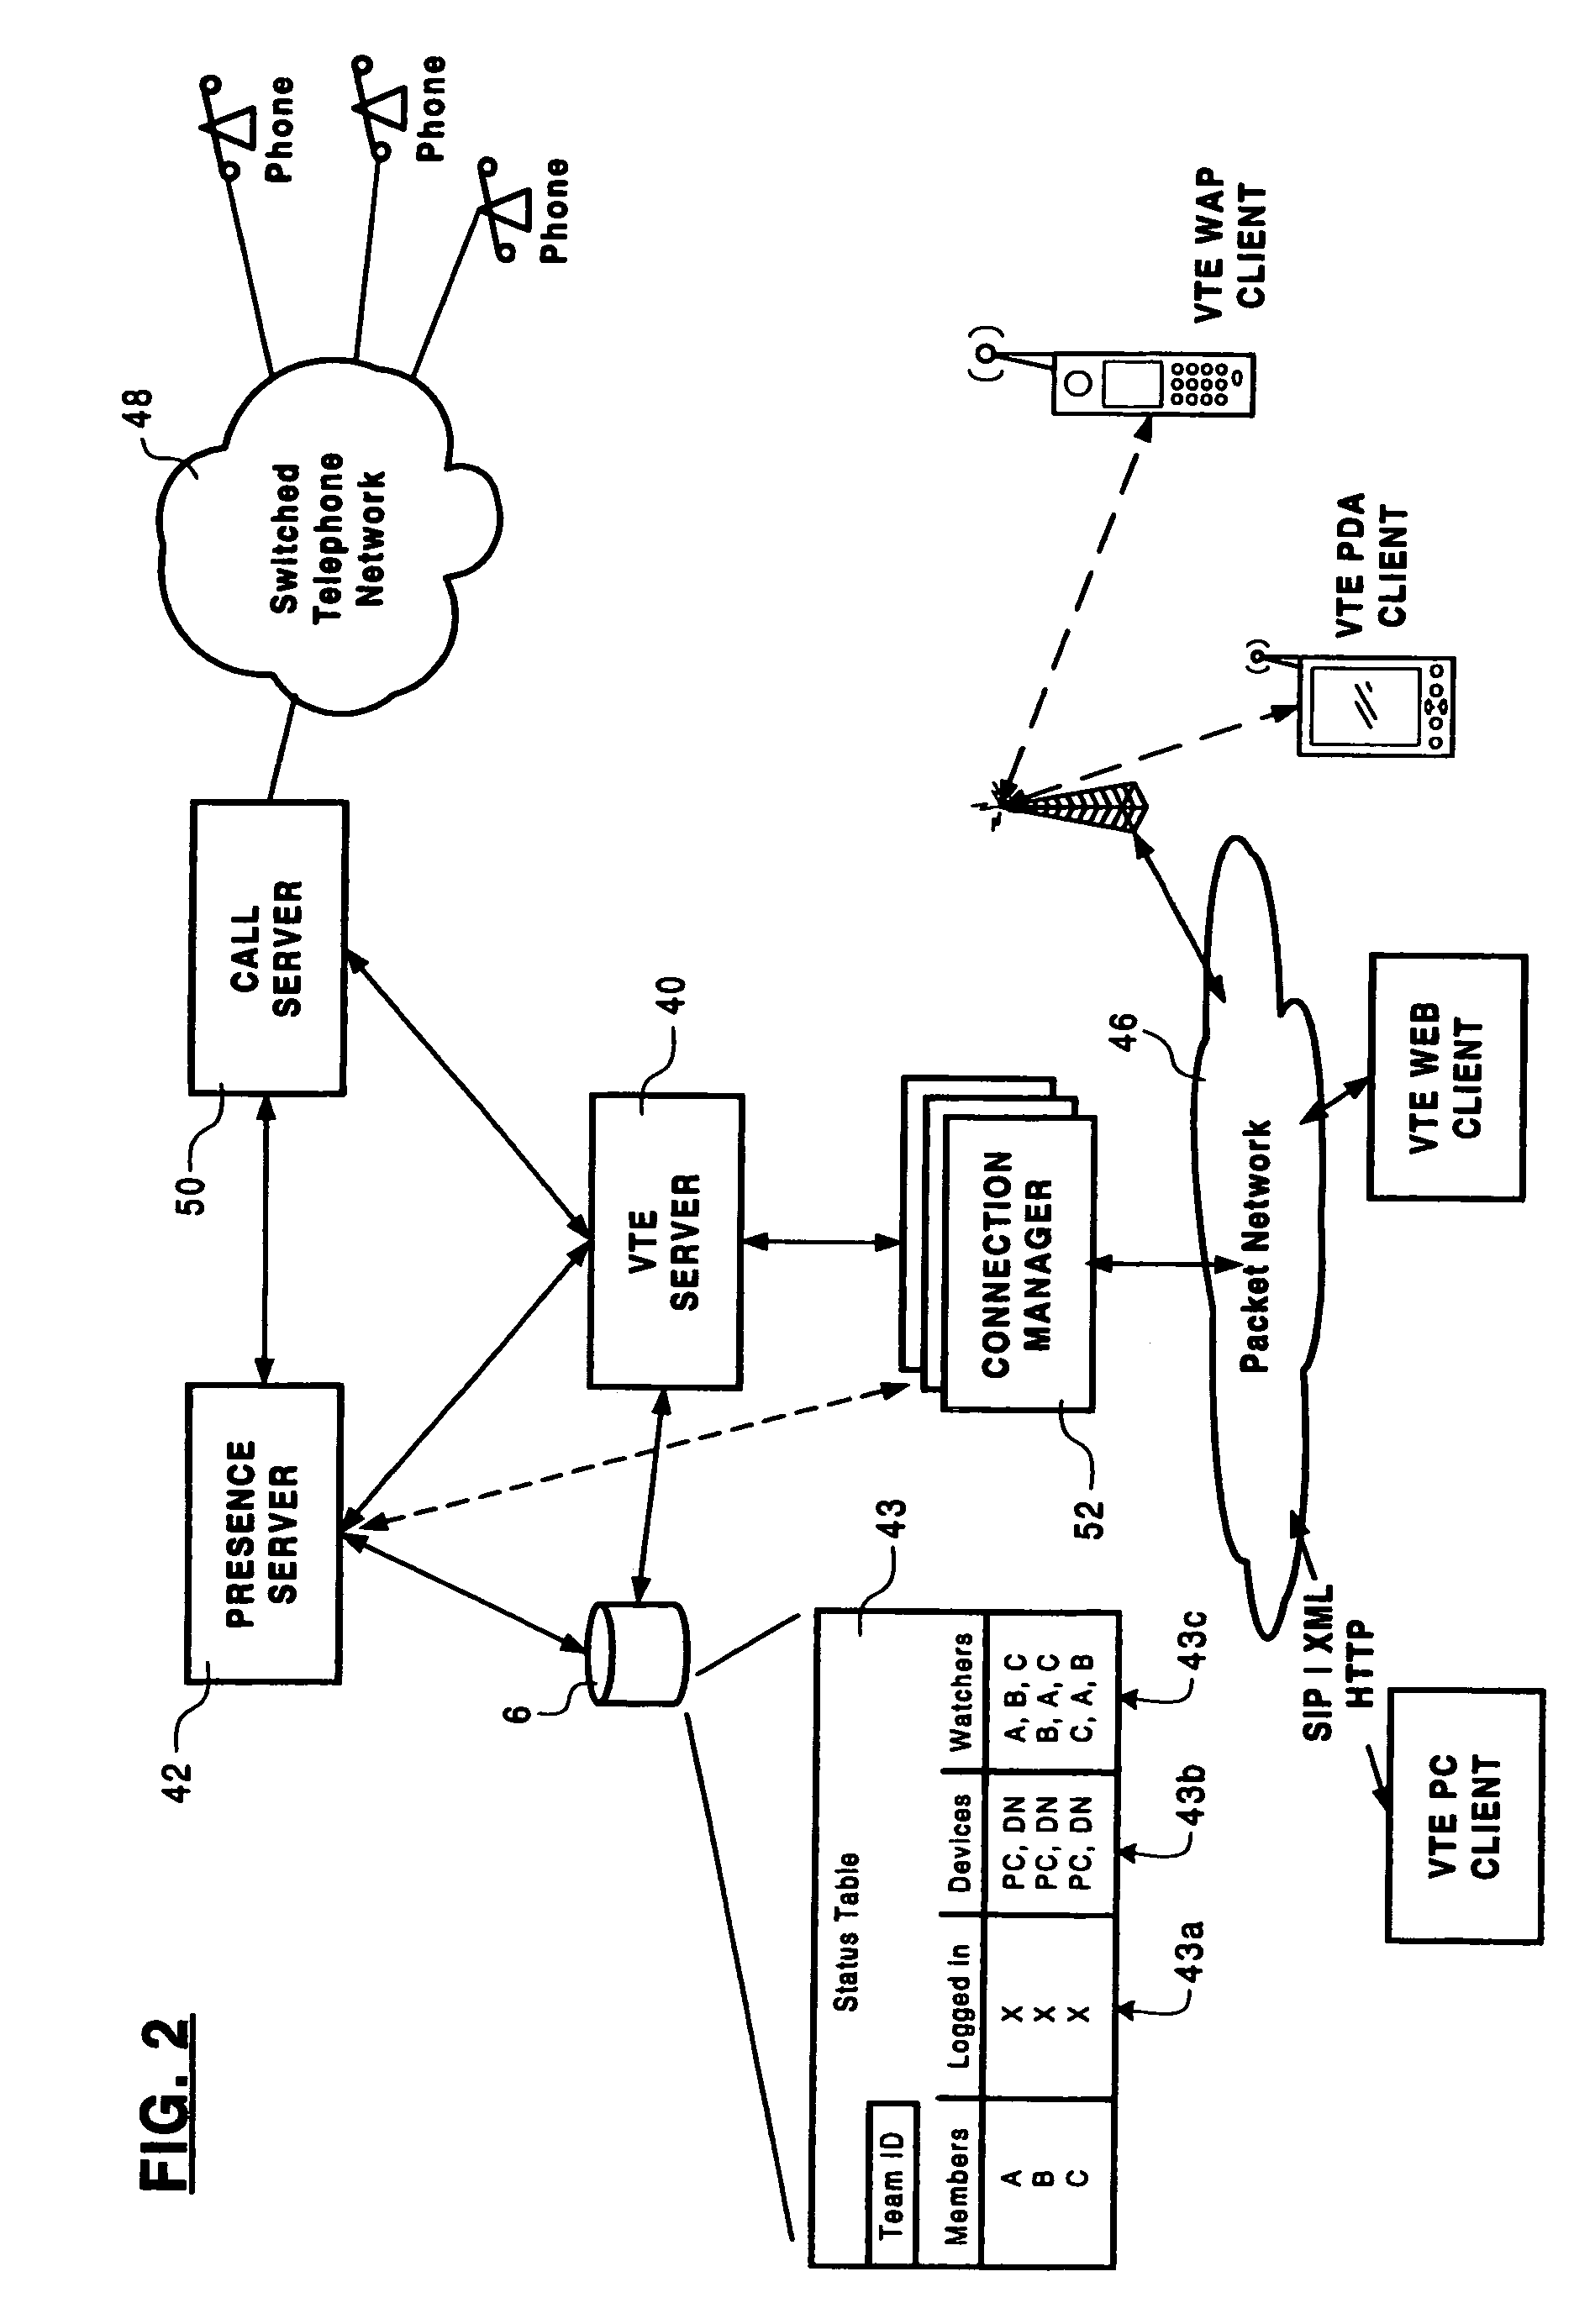 Graphical user interface for a virtual team environment